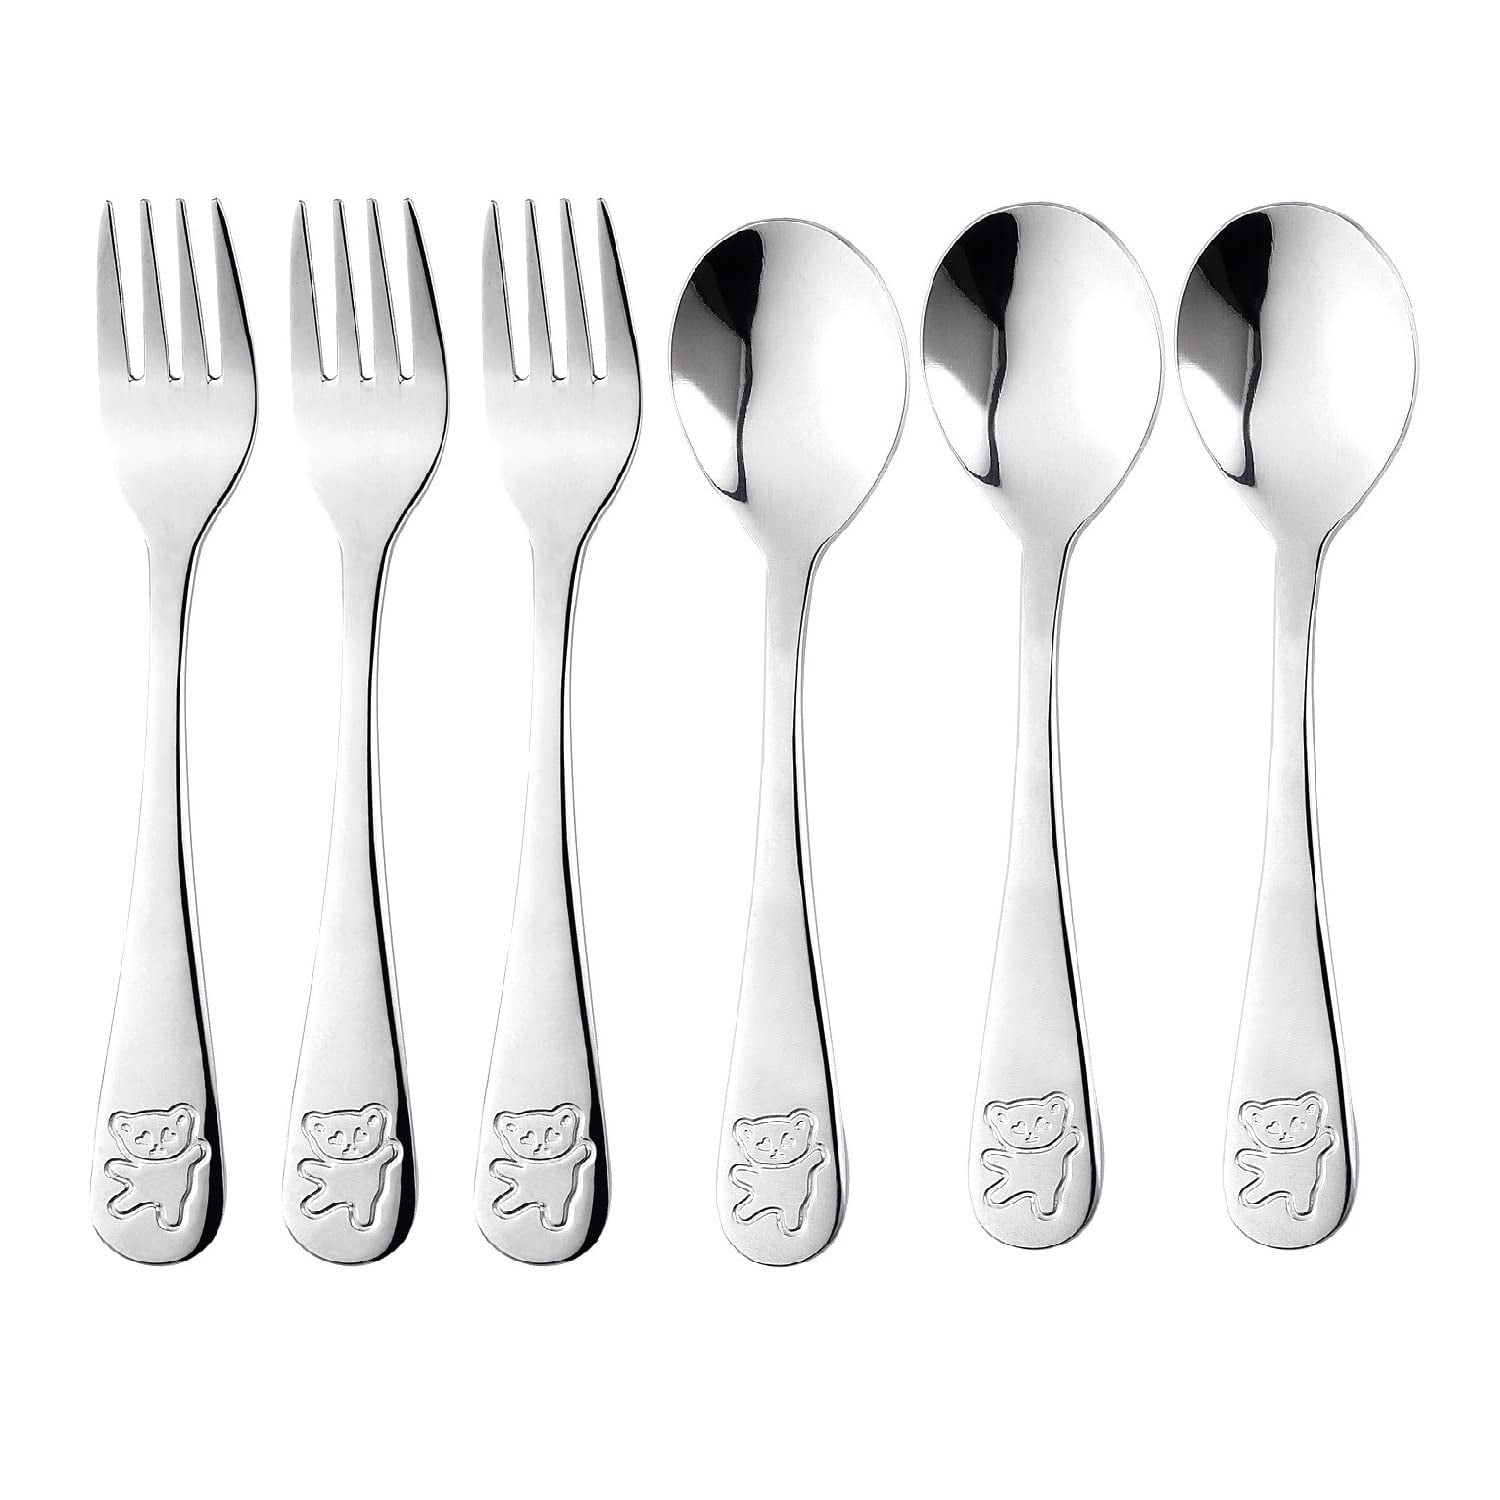 Austok 6 Pieces Kids Silverware,Toddler Utensils Stainless Steel Baby Forks and Spoons Set,3 x Safe Forks,3 x Children Spoons with Round Handle for